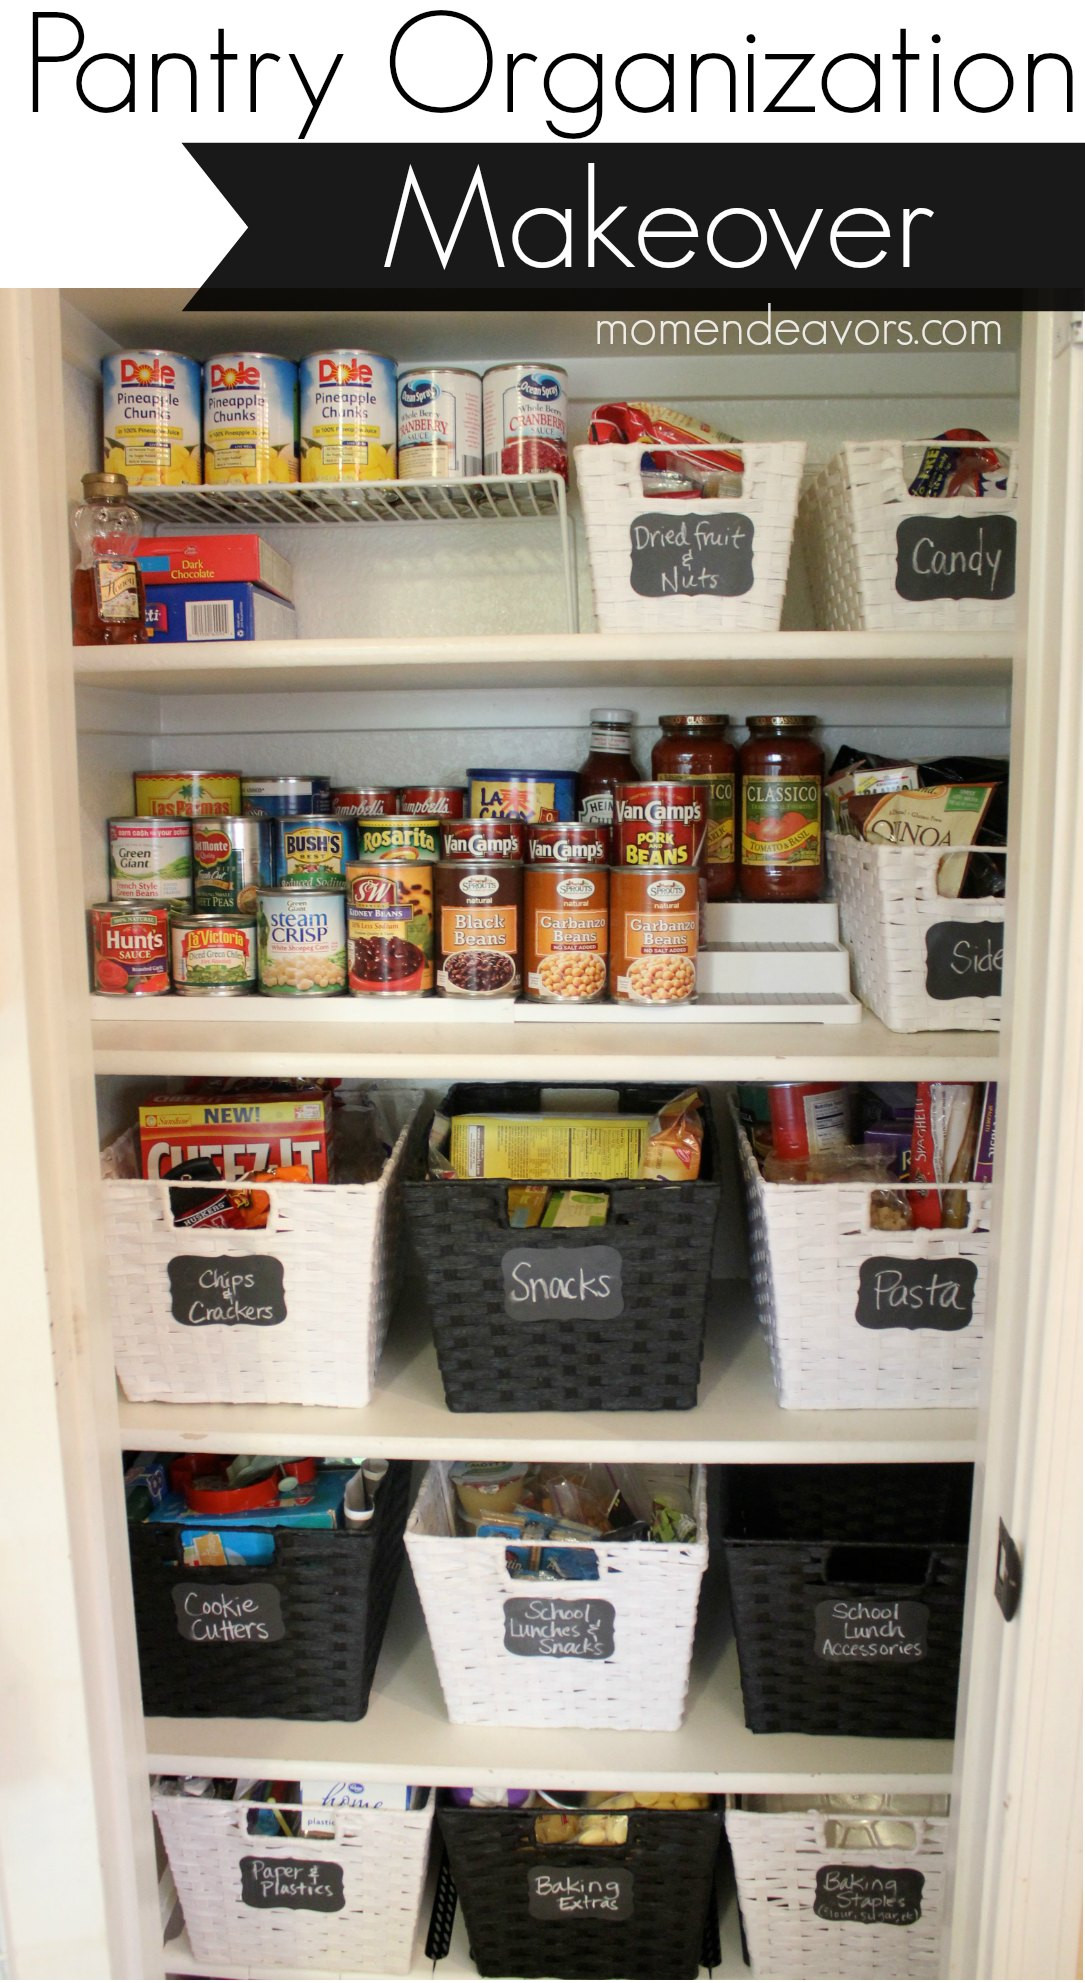 Kitchen Pantry Organizing Ideas
 20 Incredible Small Pantry Organization Ideas and